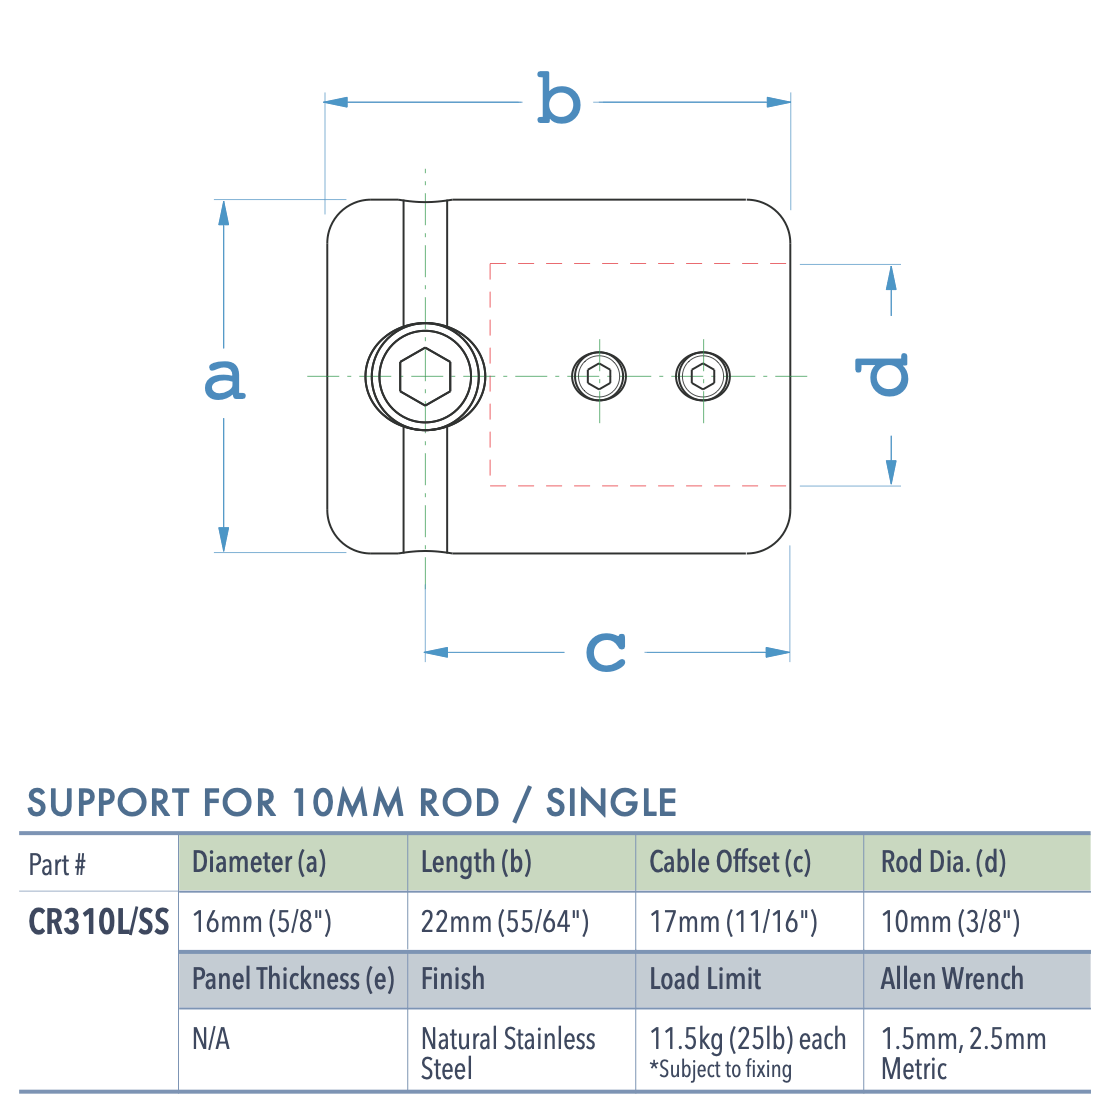 Specifications for CR110L/SS